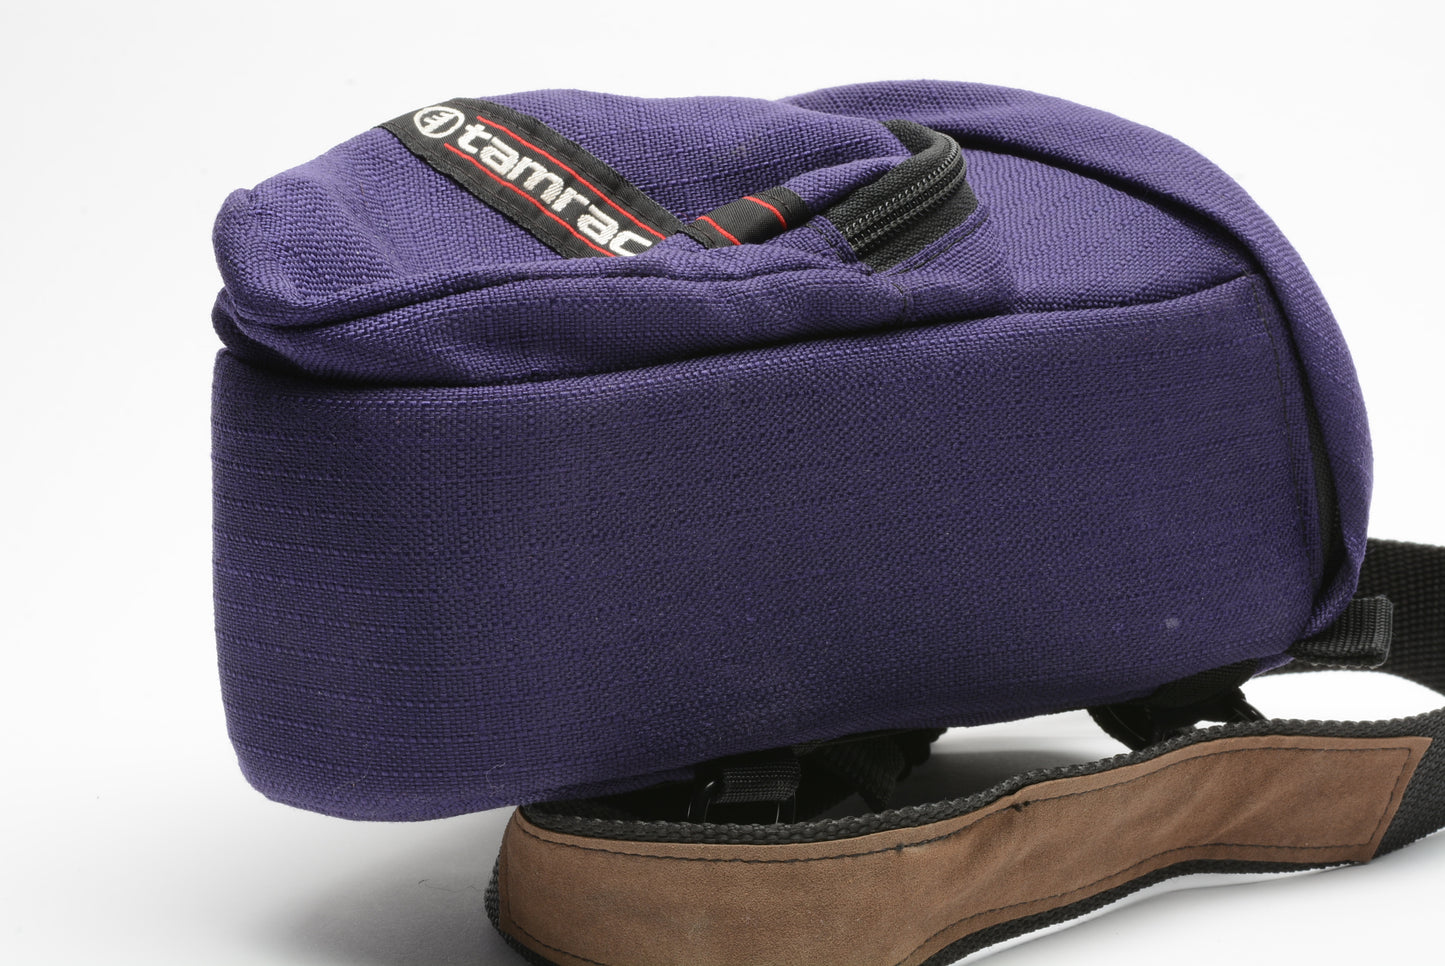 Tamrac #515 compact holster case for film or digital DSLRs, nice and clean (Purple)